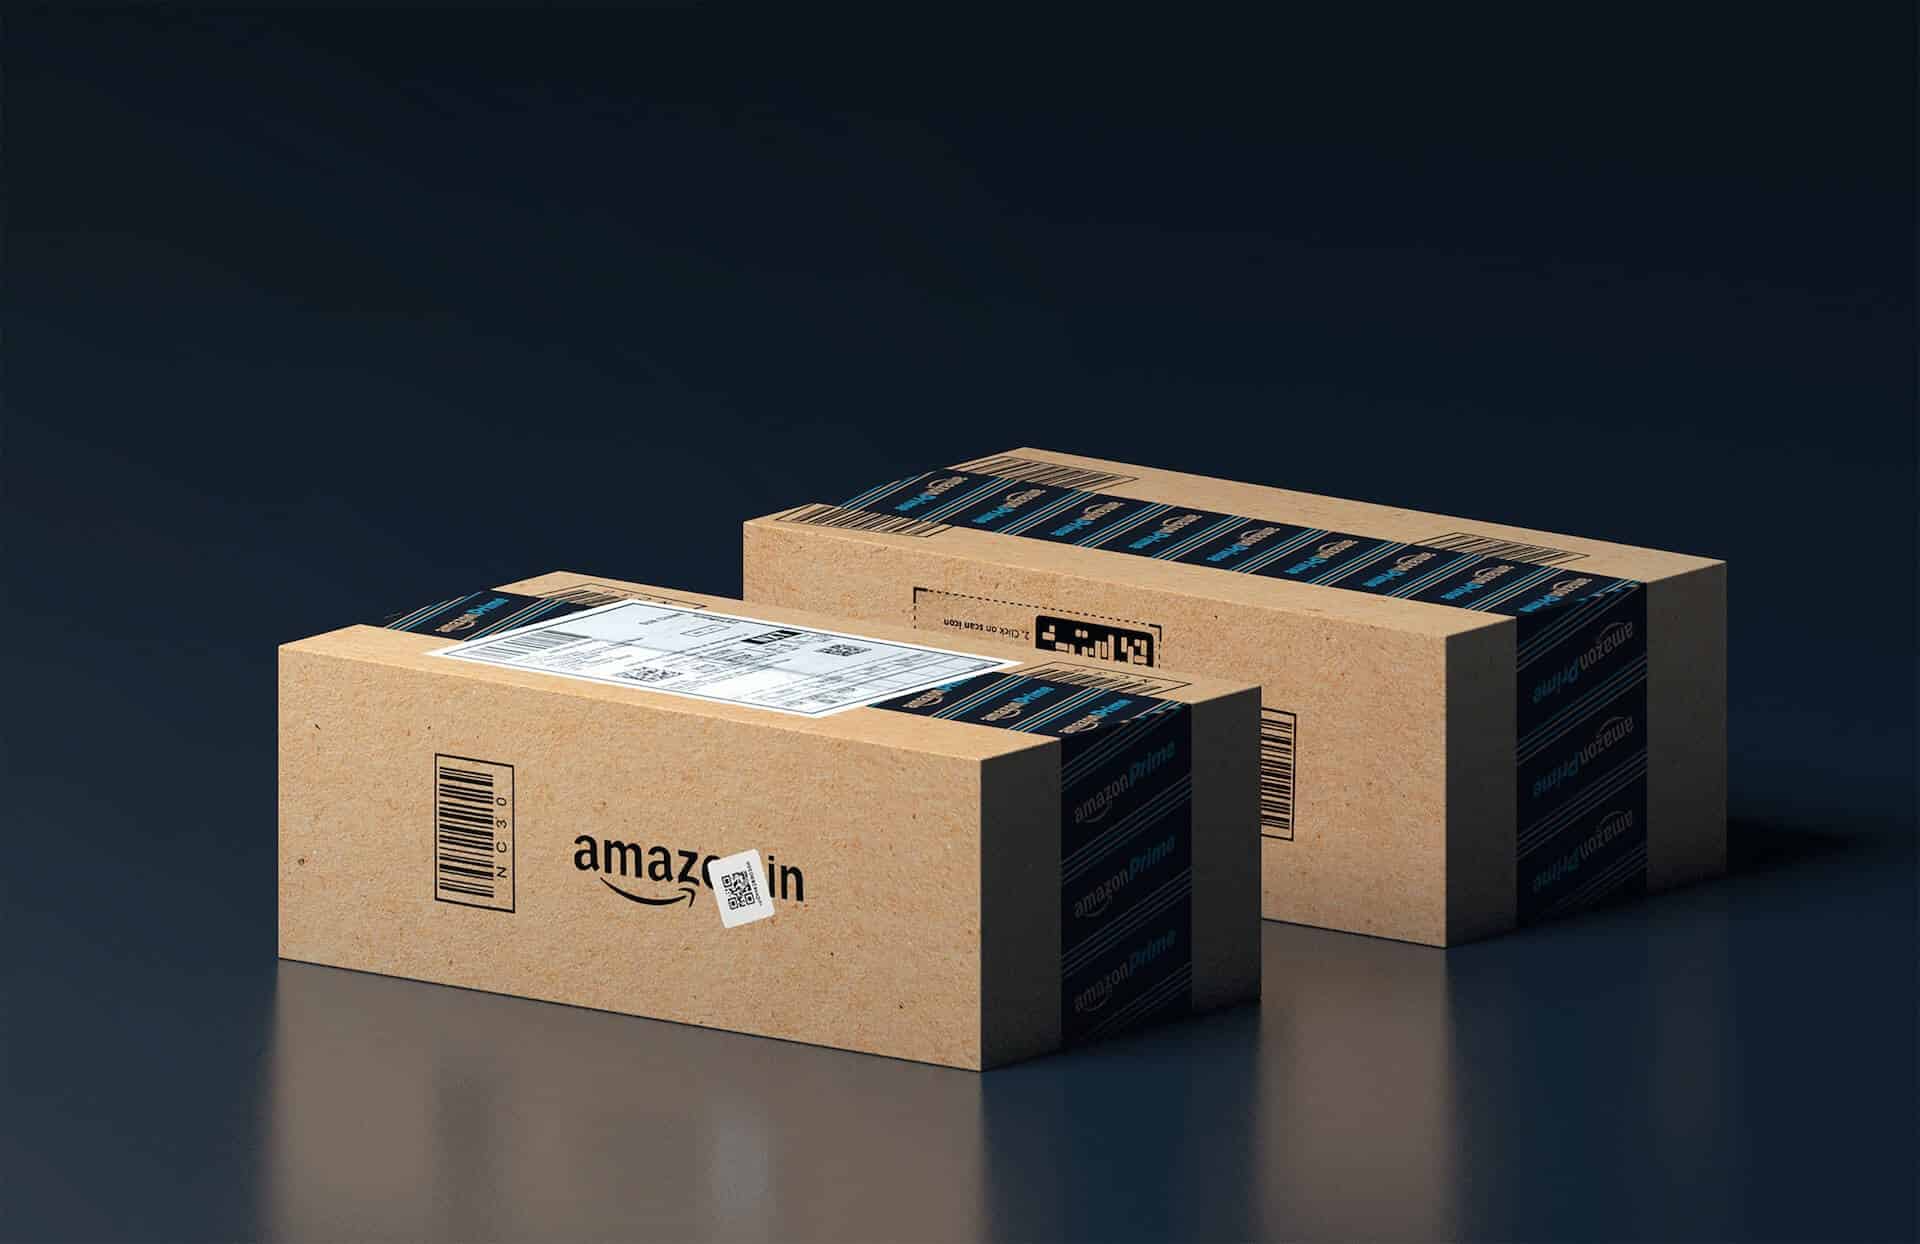 Amazon box to show accountancy solutions for amazon sellers